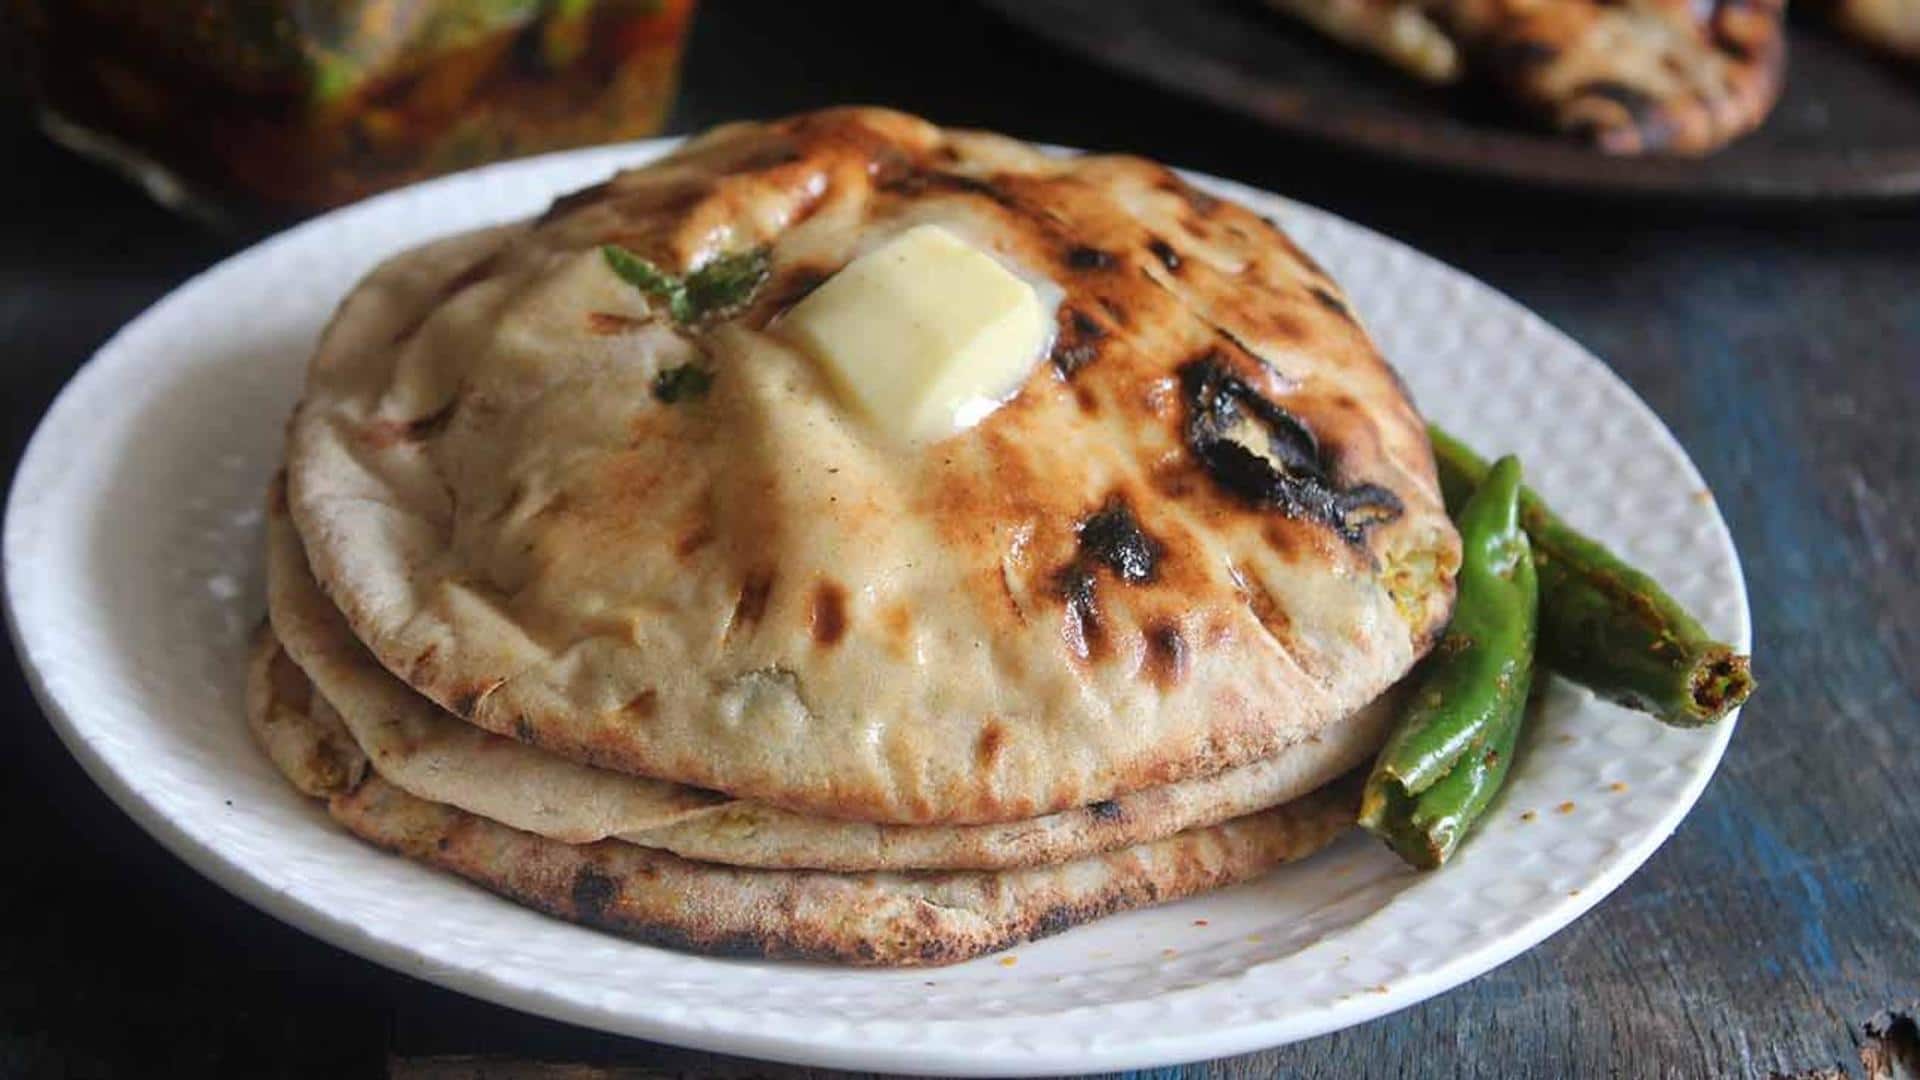 Craving some delicious kulchas? Try these recipes at home